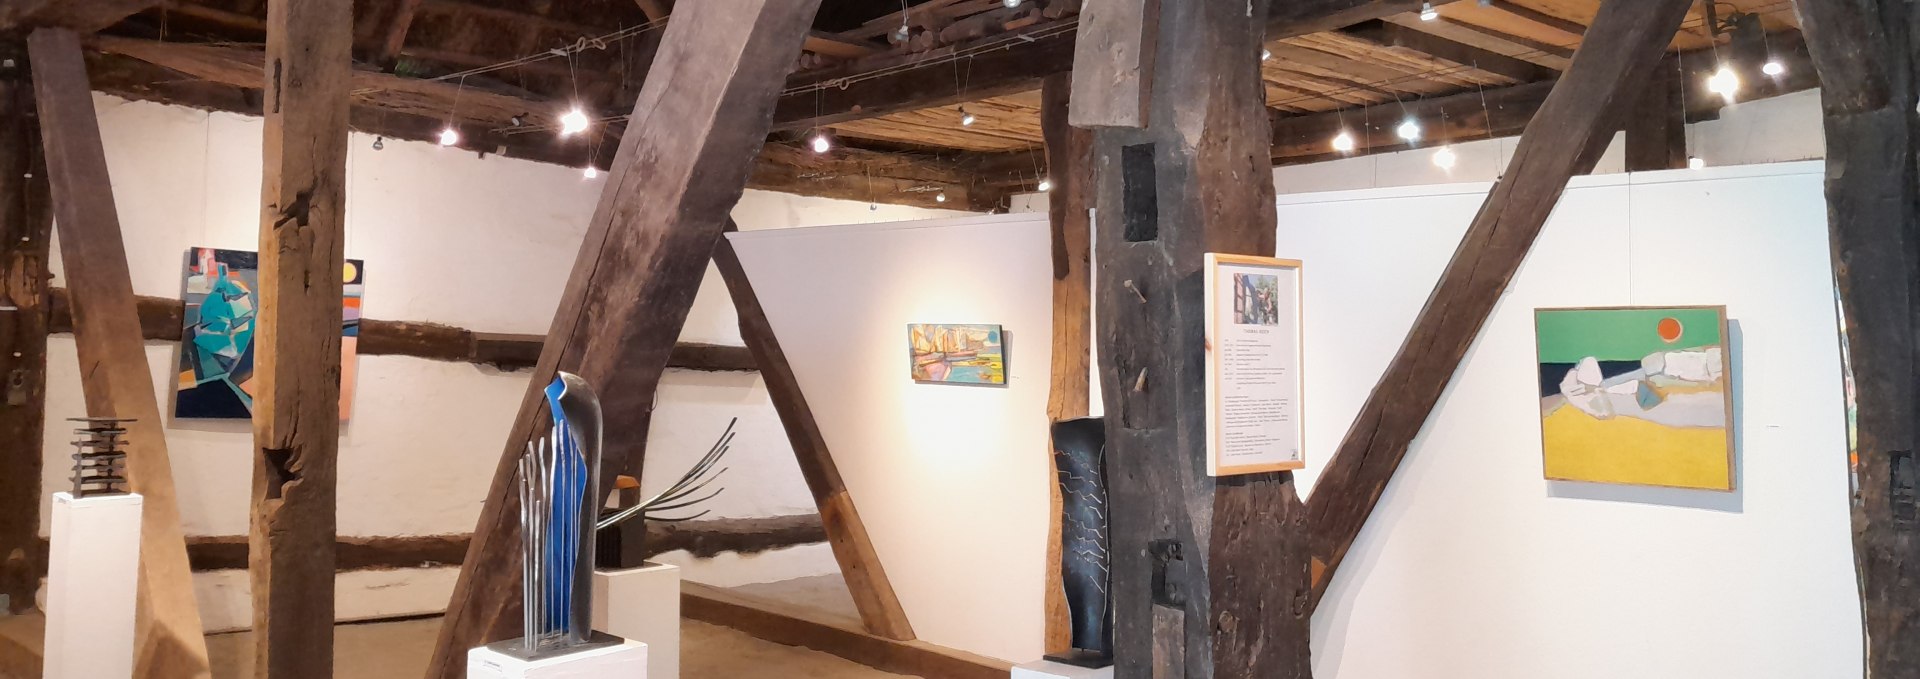 Summer exhibition in the art barn, © Cindy Wohlrab / KVW Wustrow